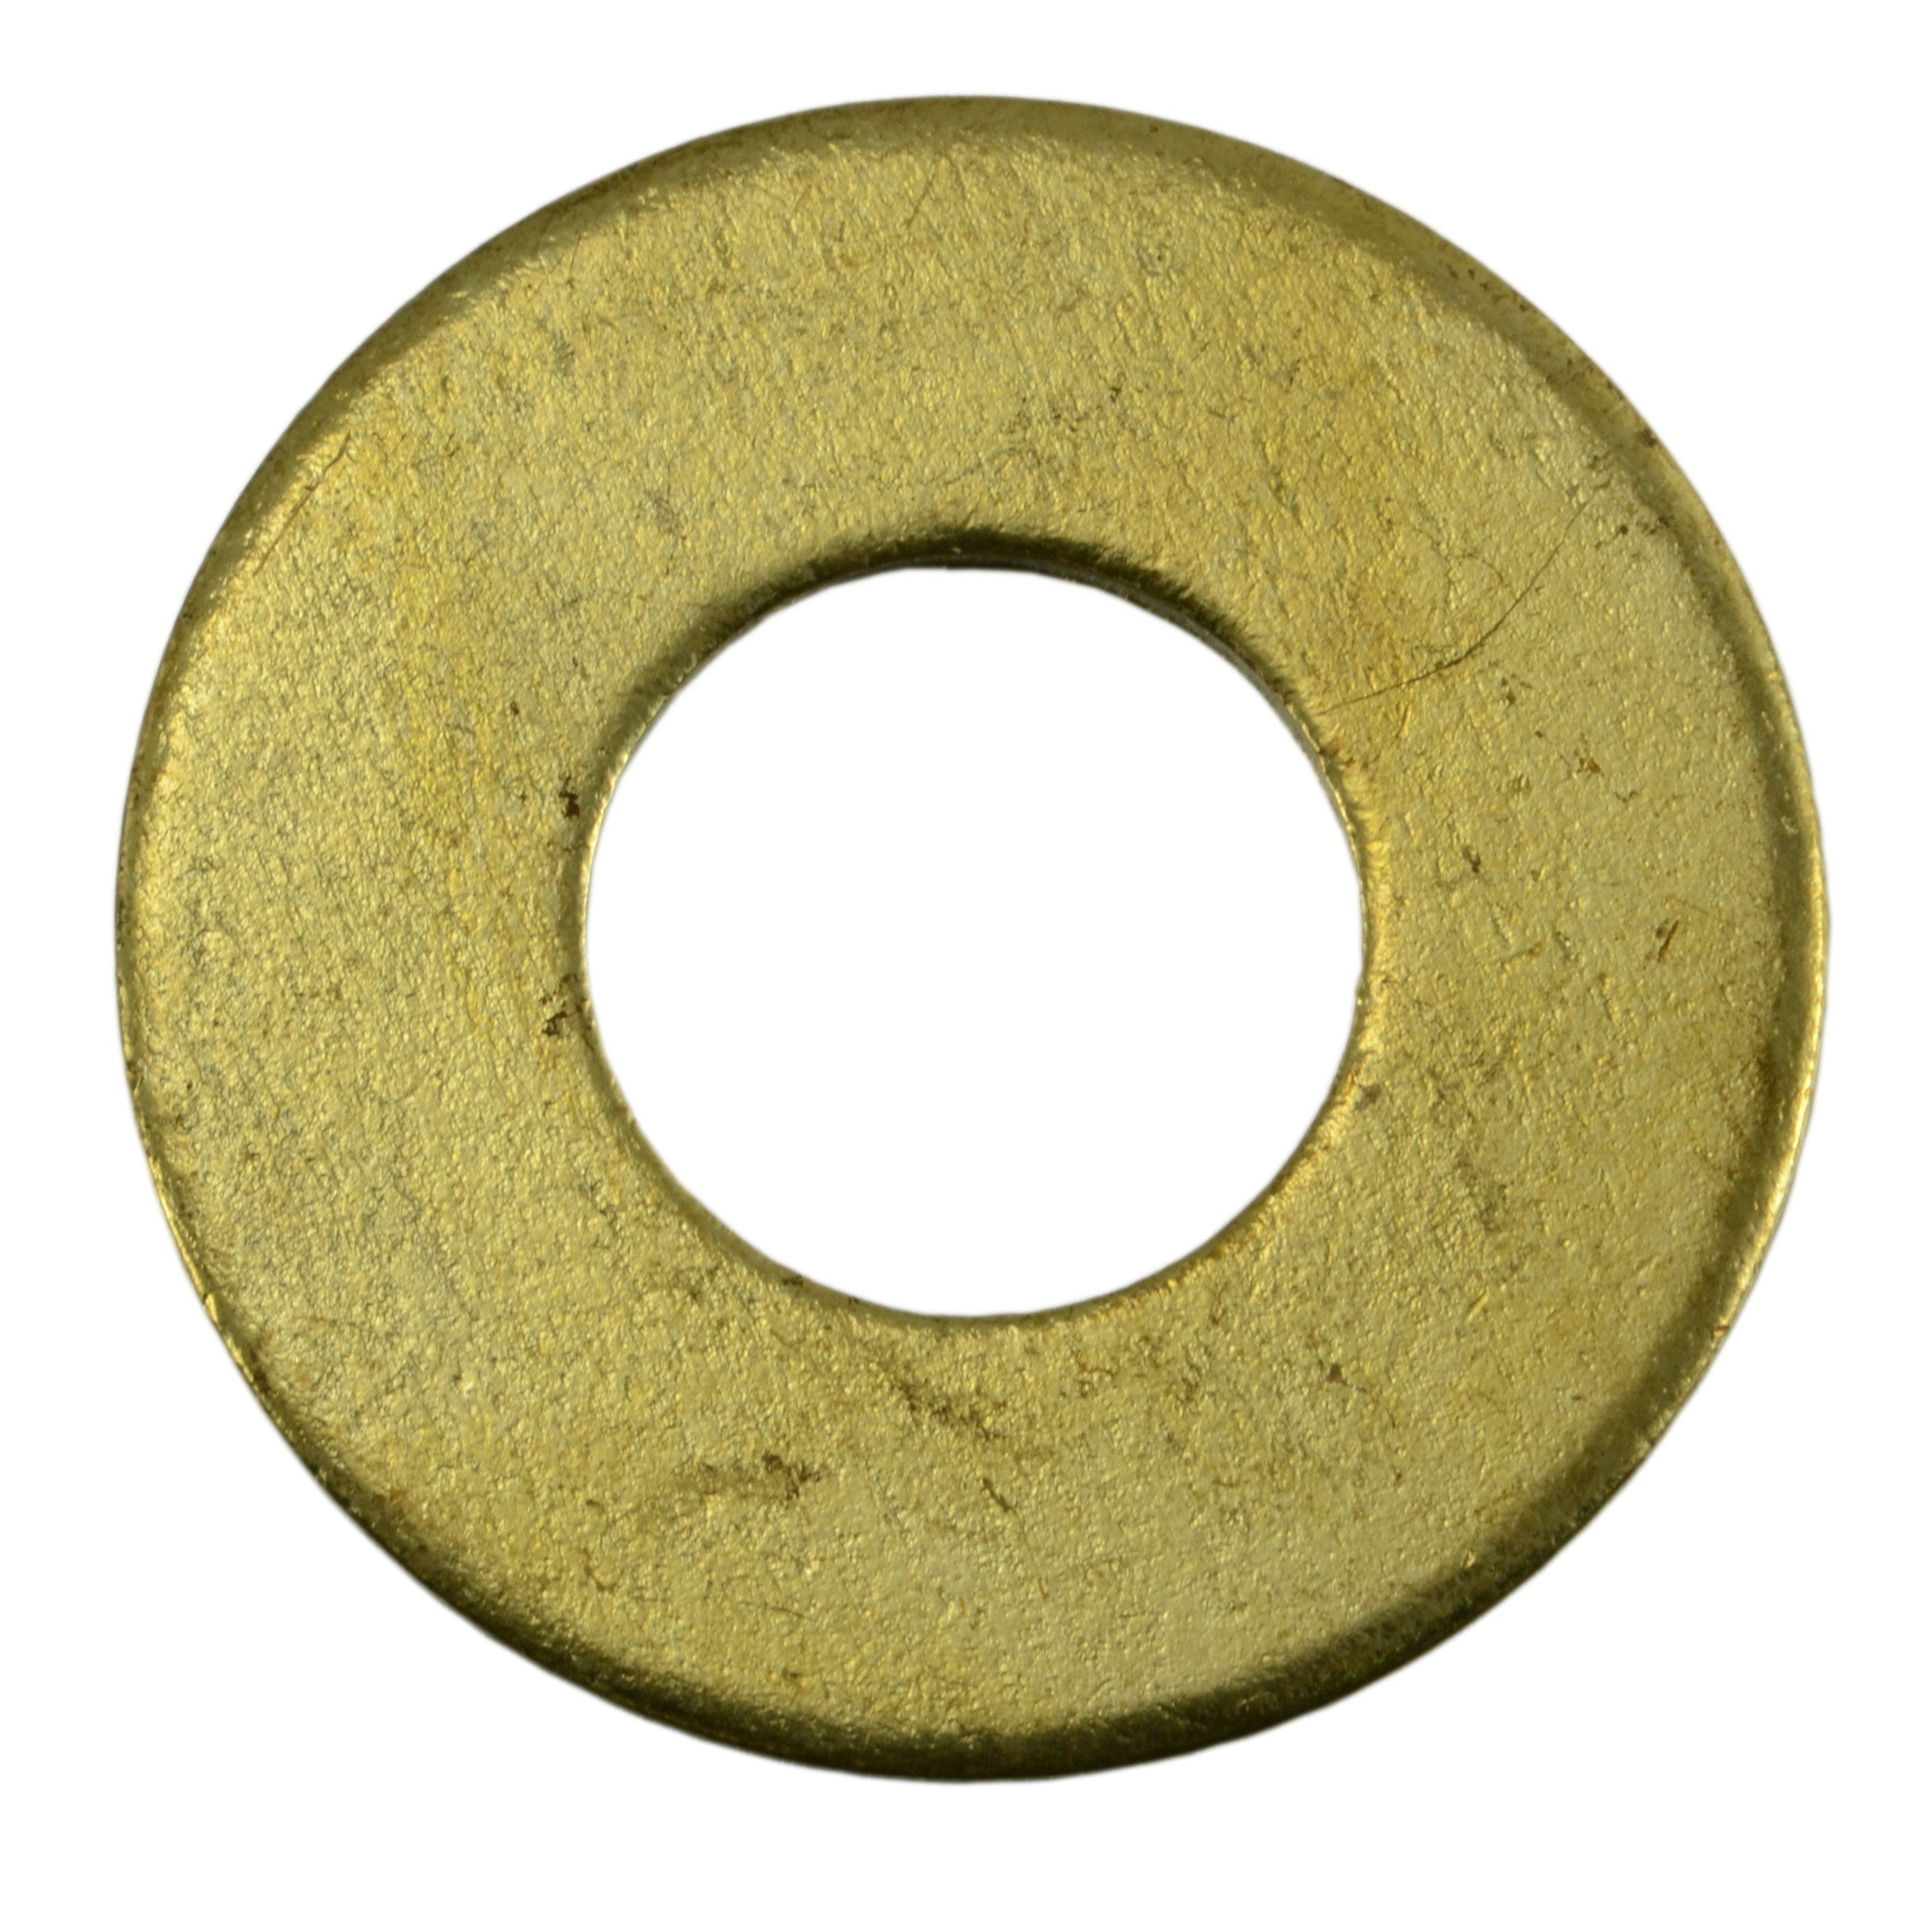 20 pack of Brass Flat washers   1/4 = #10 = #8 